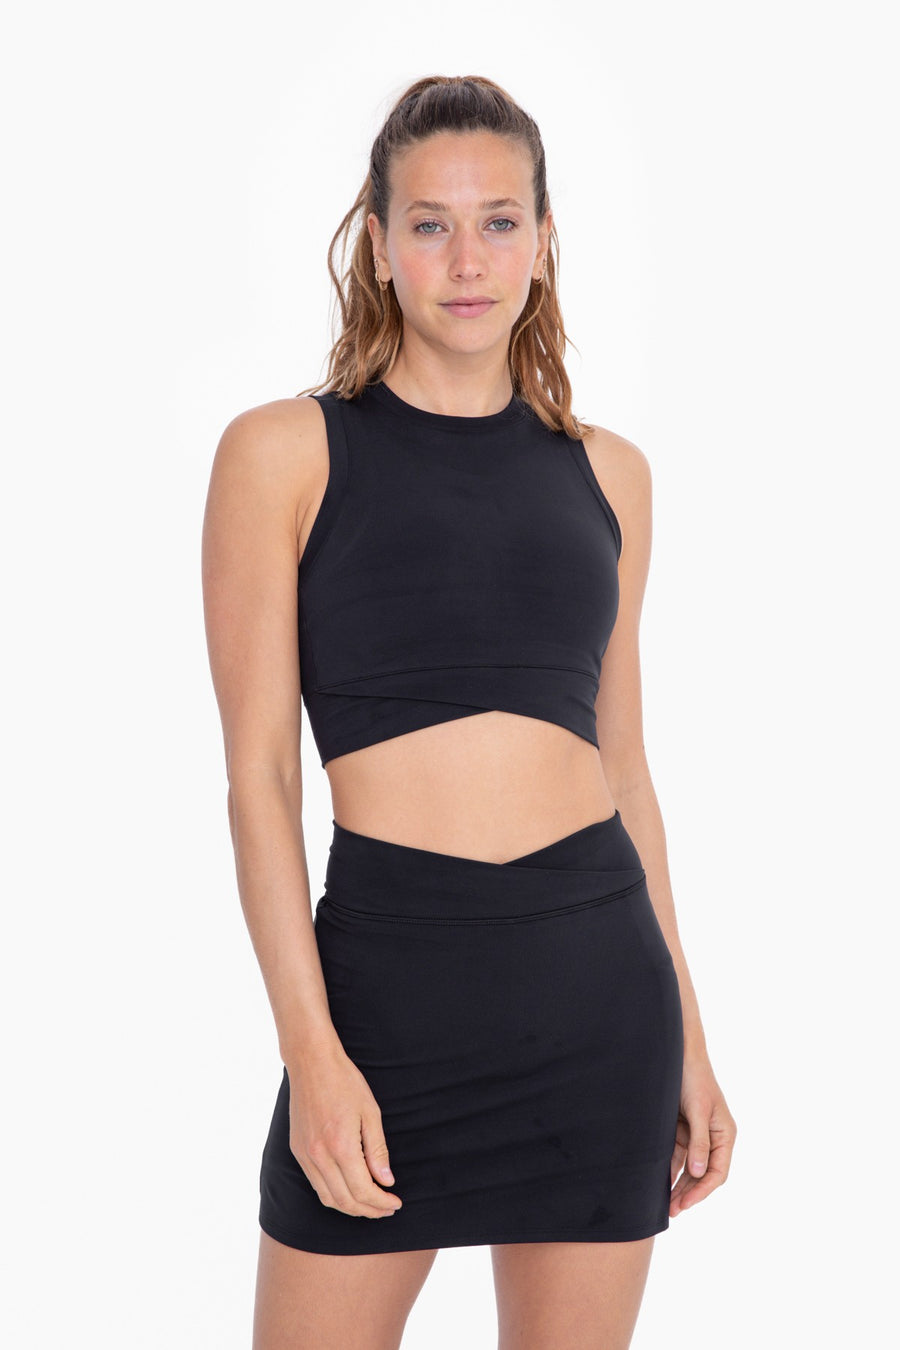 Featuring a high neck cropped tank with a front crossover detail and built in bra in the color black 